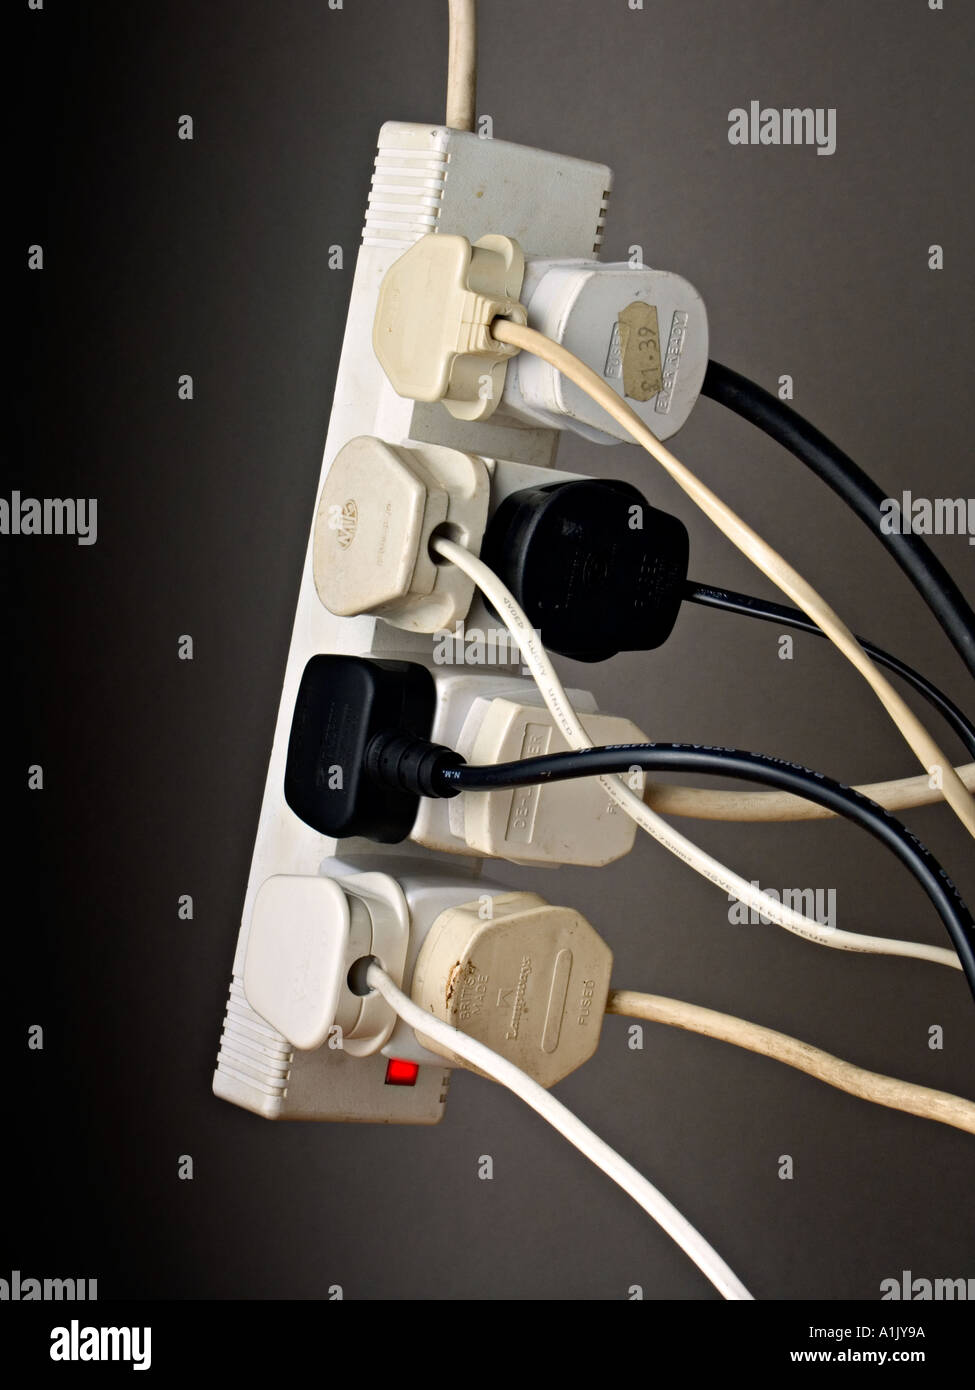 A dangerously overloaded extension cable Stock Photo - Alamy